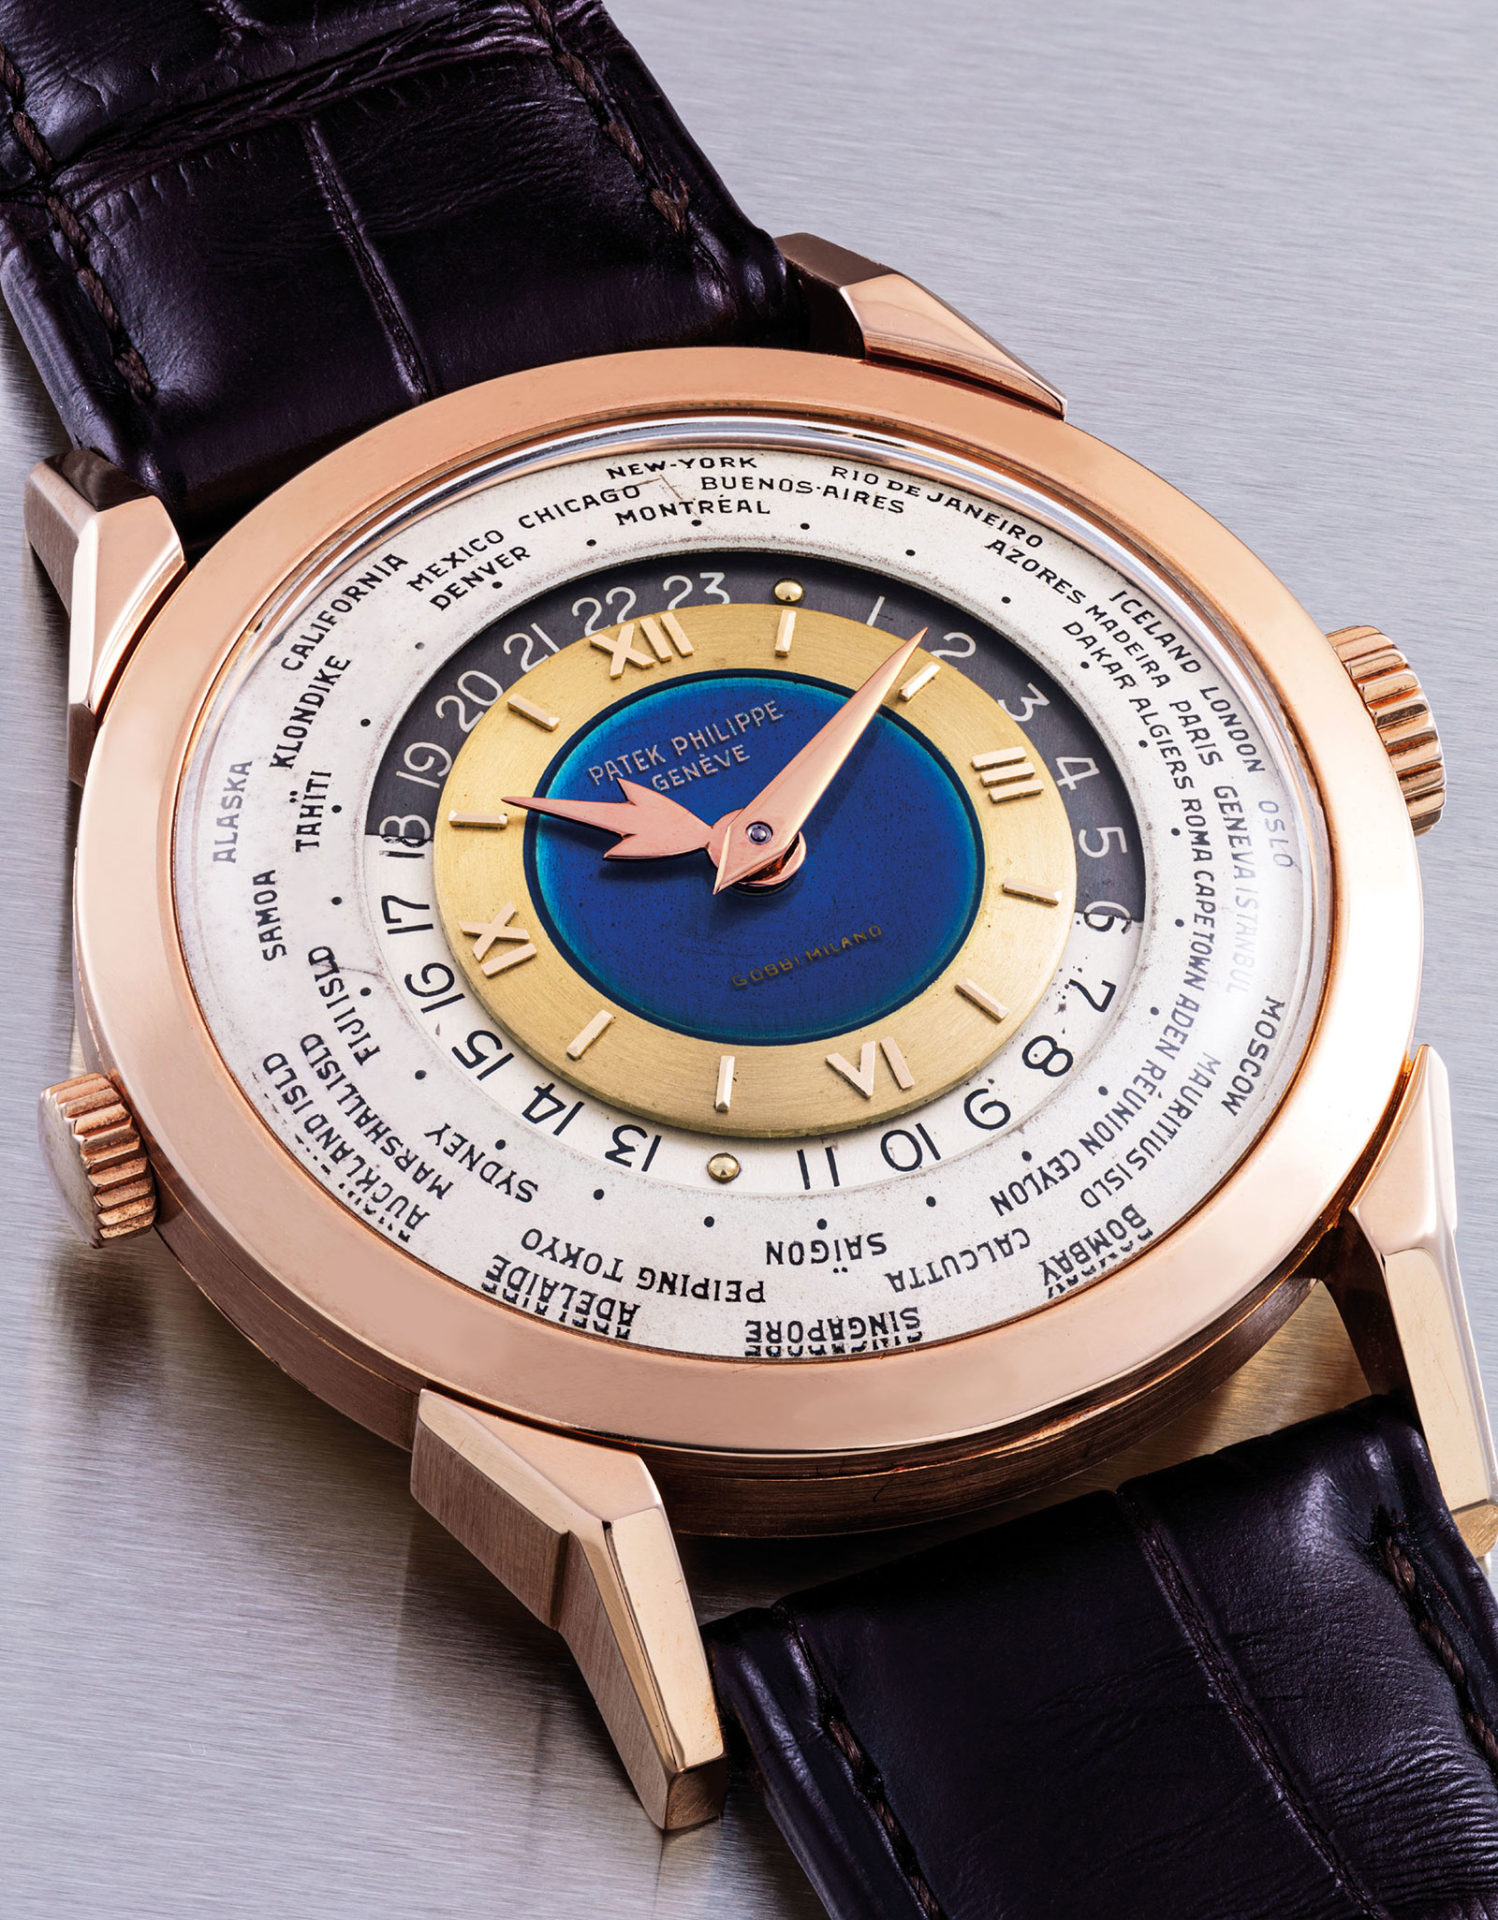 How much do you think this piece unique Patek Philippe would sell